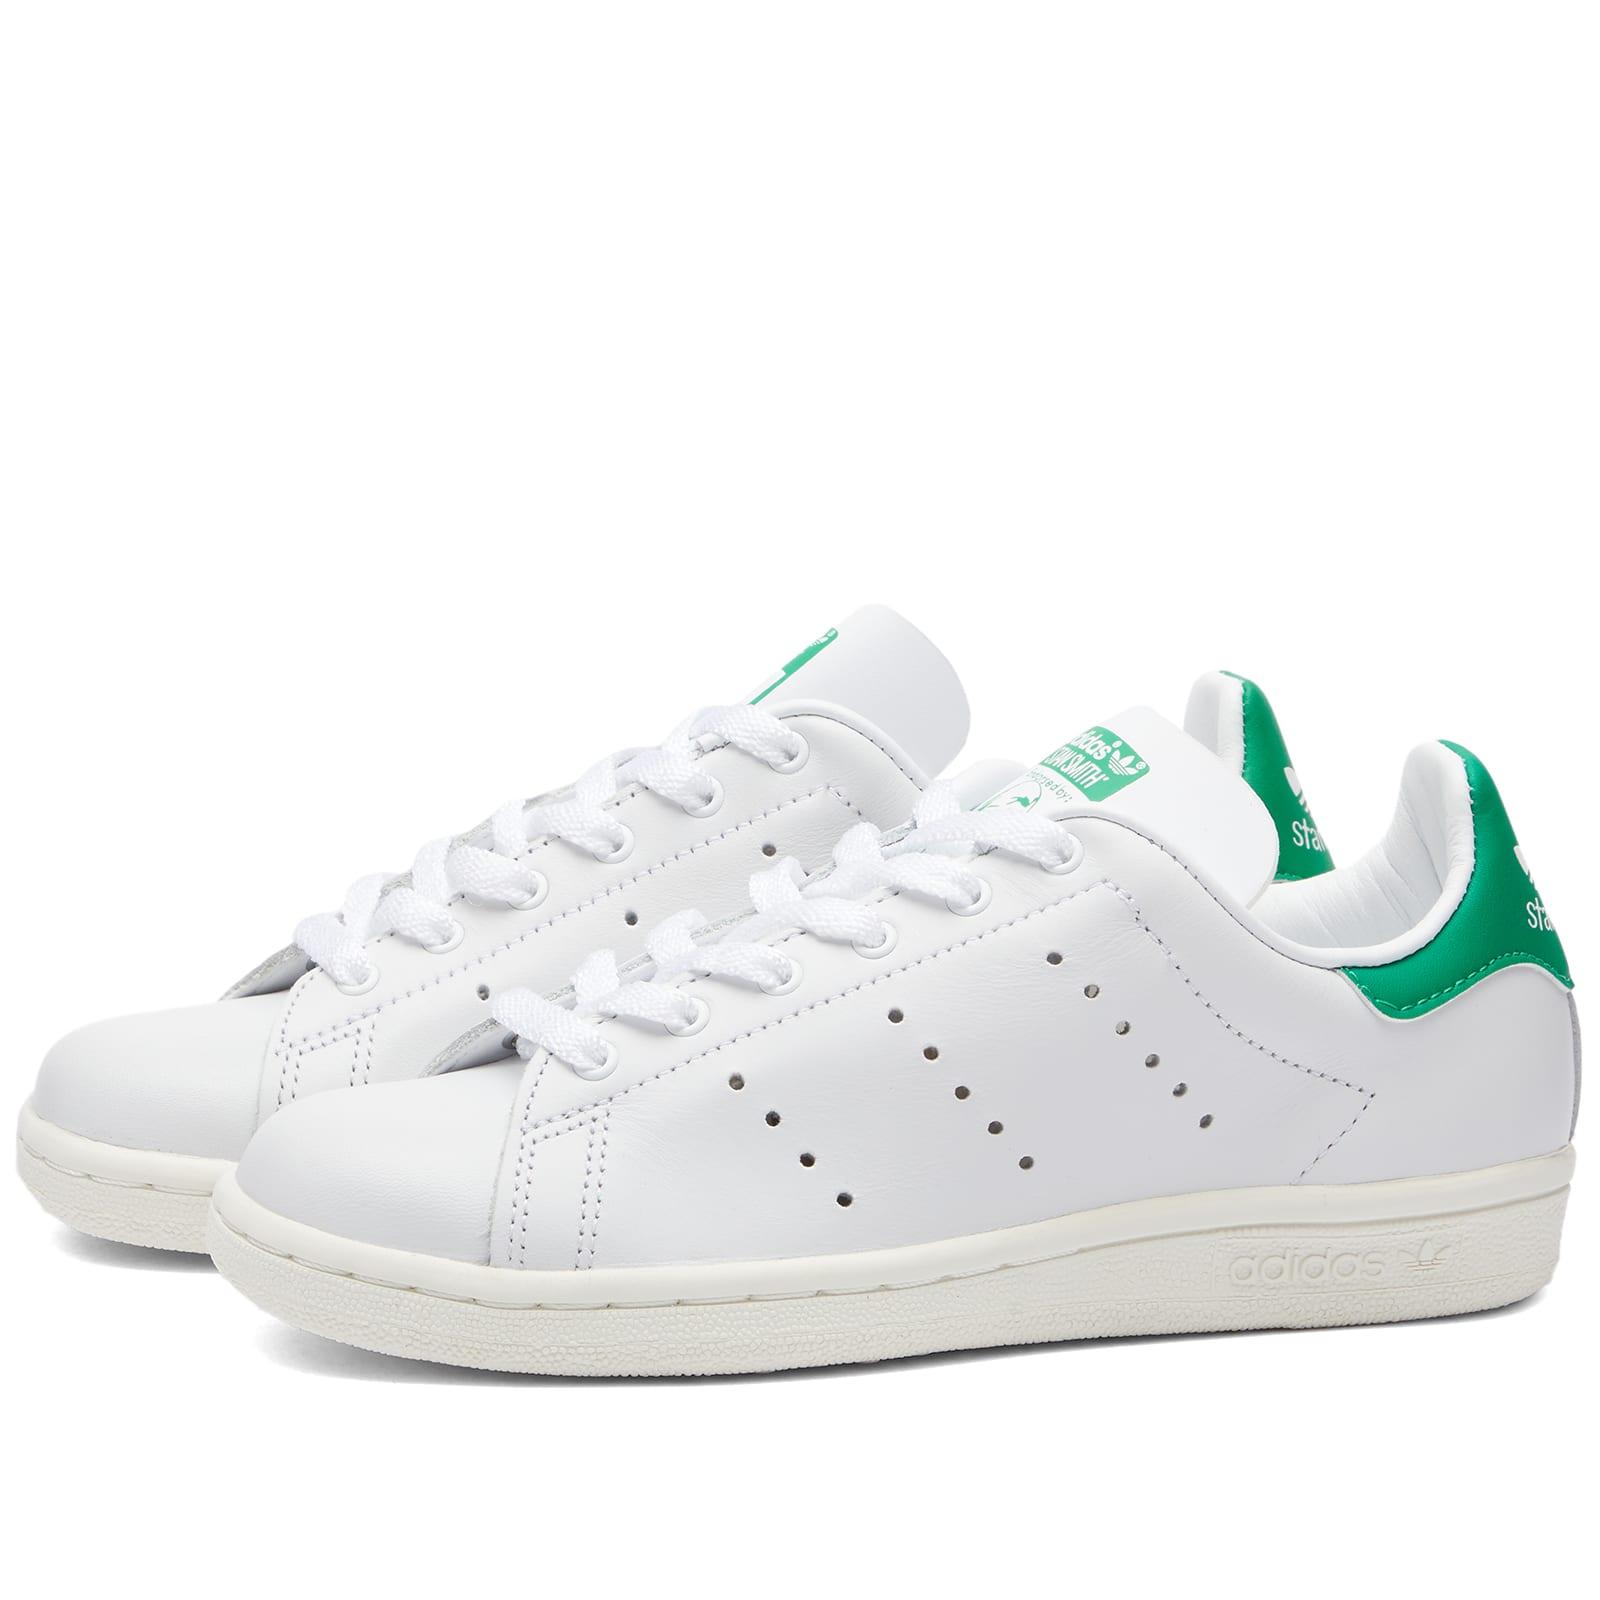 adidas Stan Smith 80s Sneakers in White | Lyst